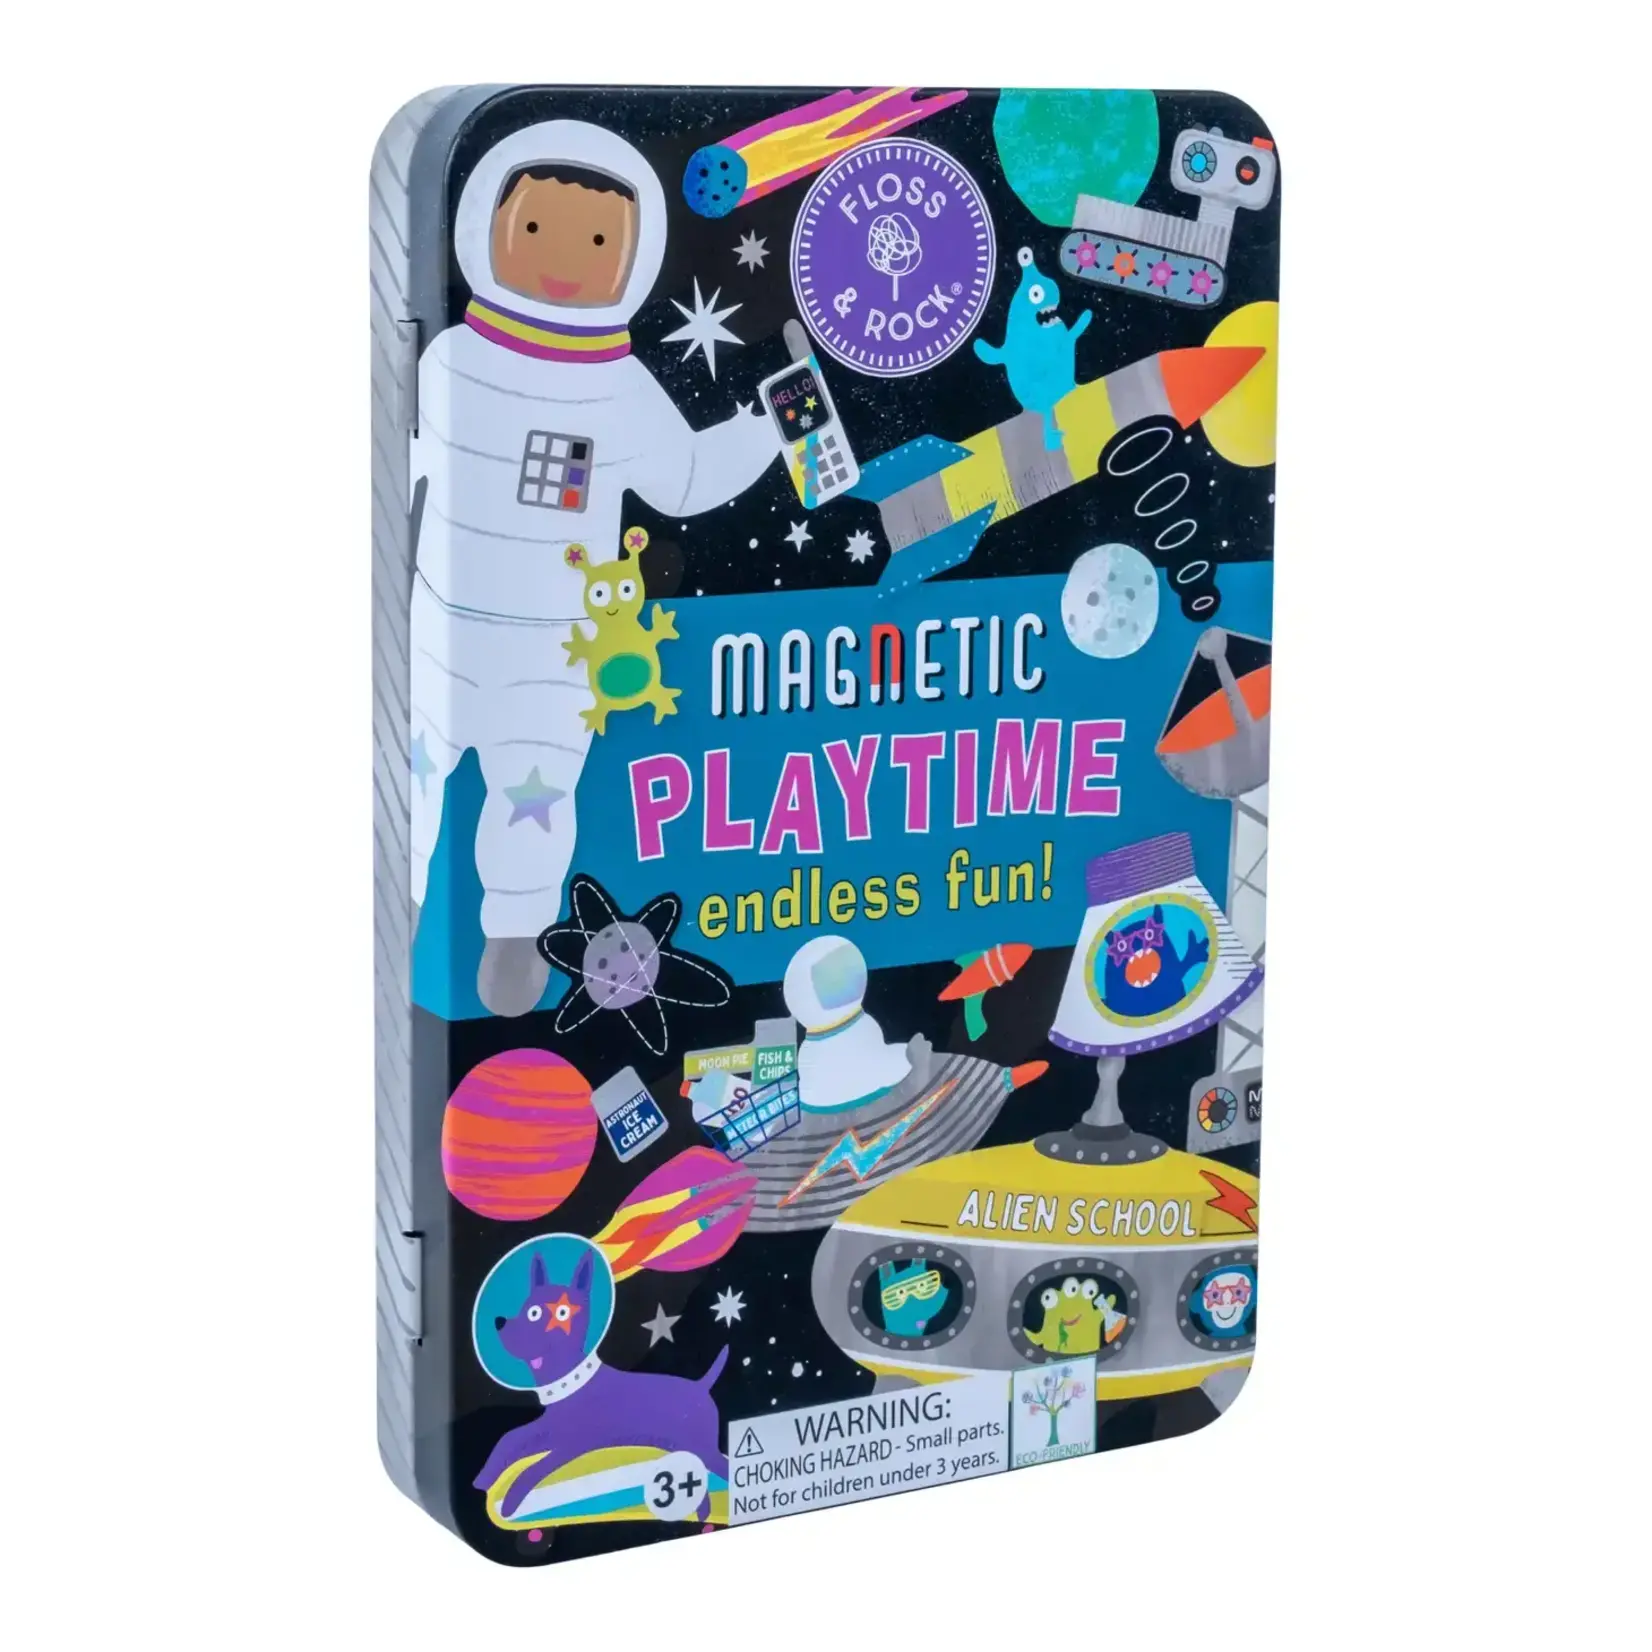 Floss and Rock Magnetic Playtime Space